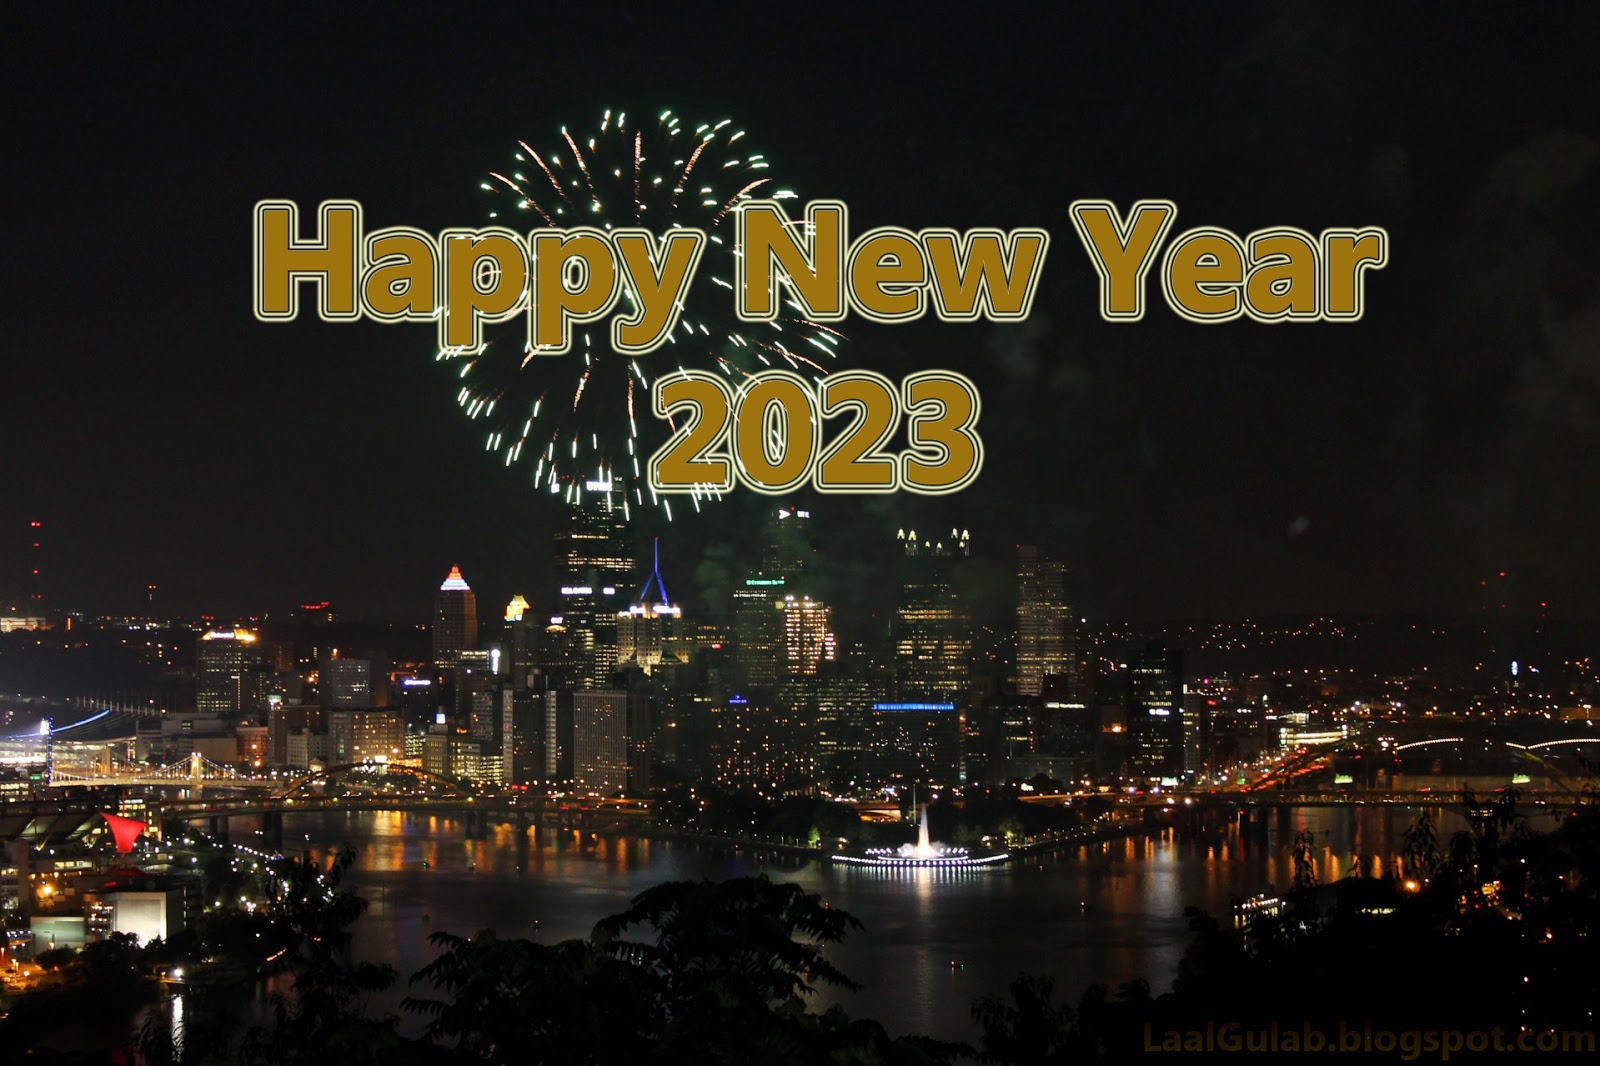 Happy New Year 2023 HD Images, New Year Wallpaper FestiFit